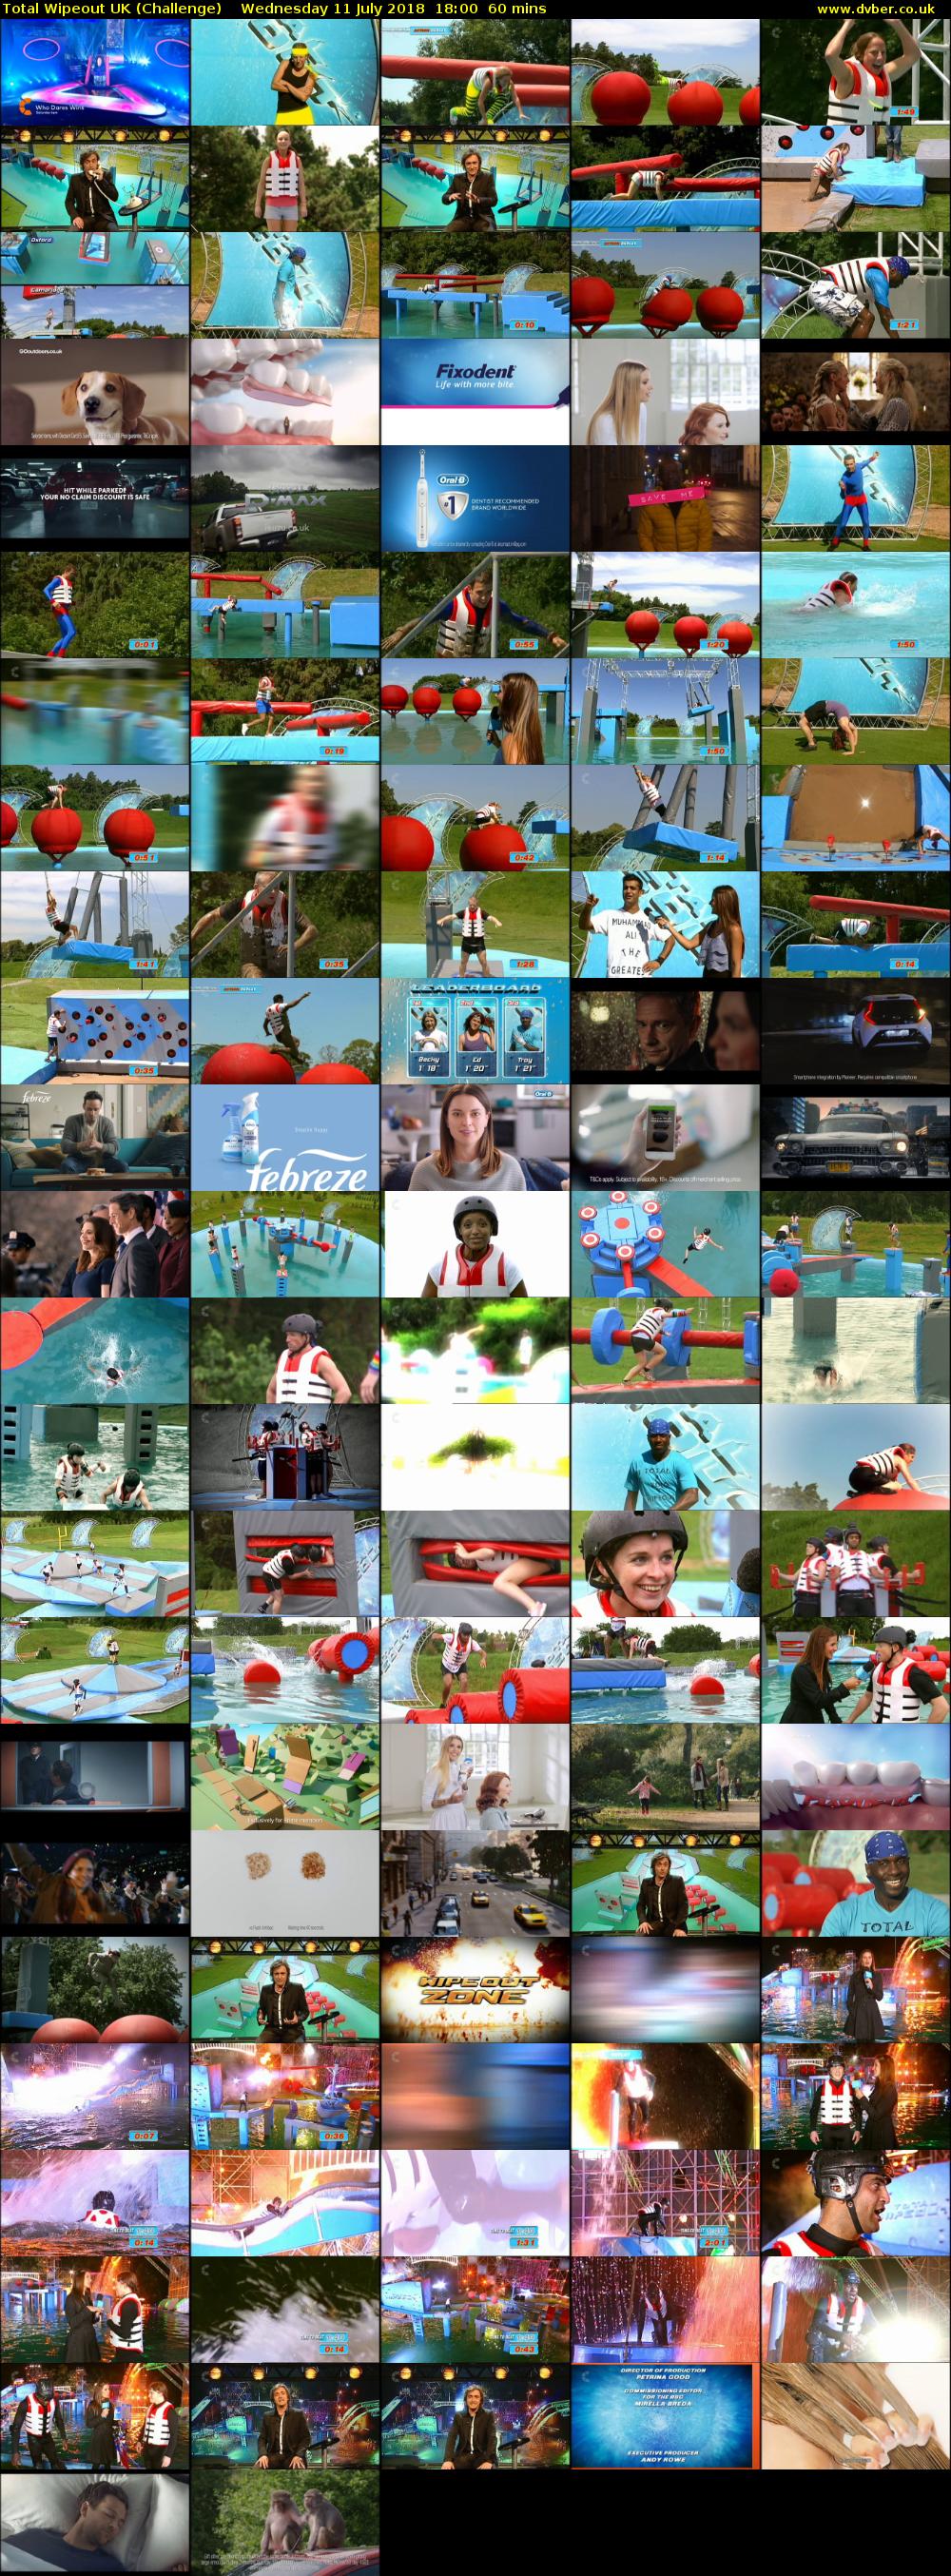 Total Wipeout UK (Challenge) Wednesday 11 July 2018 18:00 - 19:00